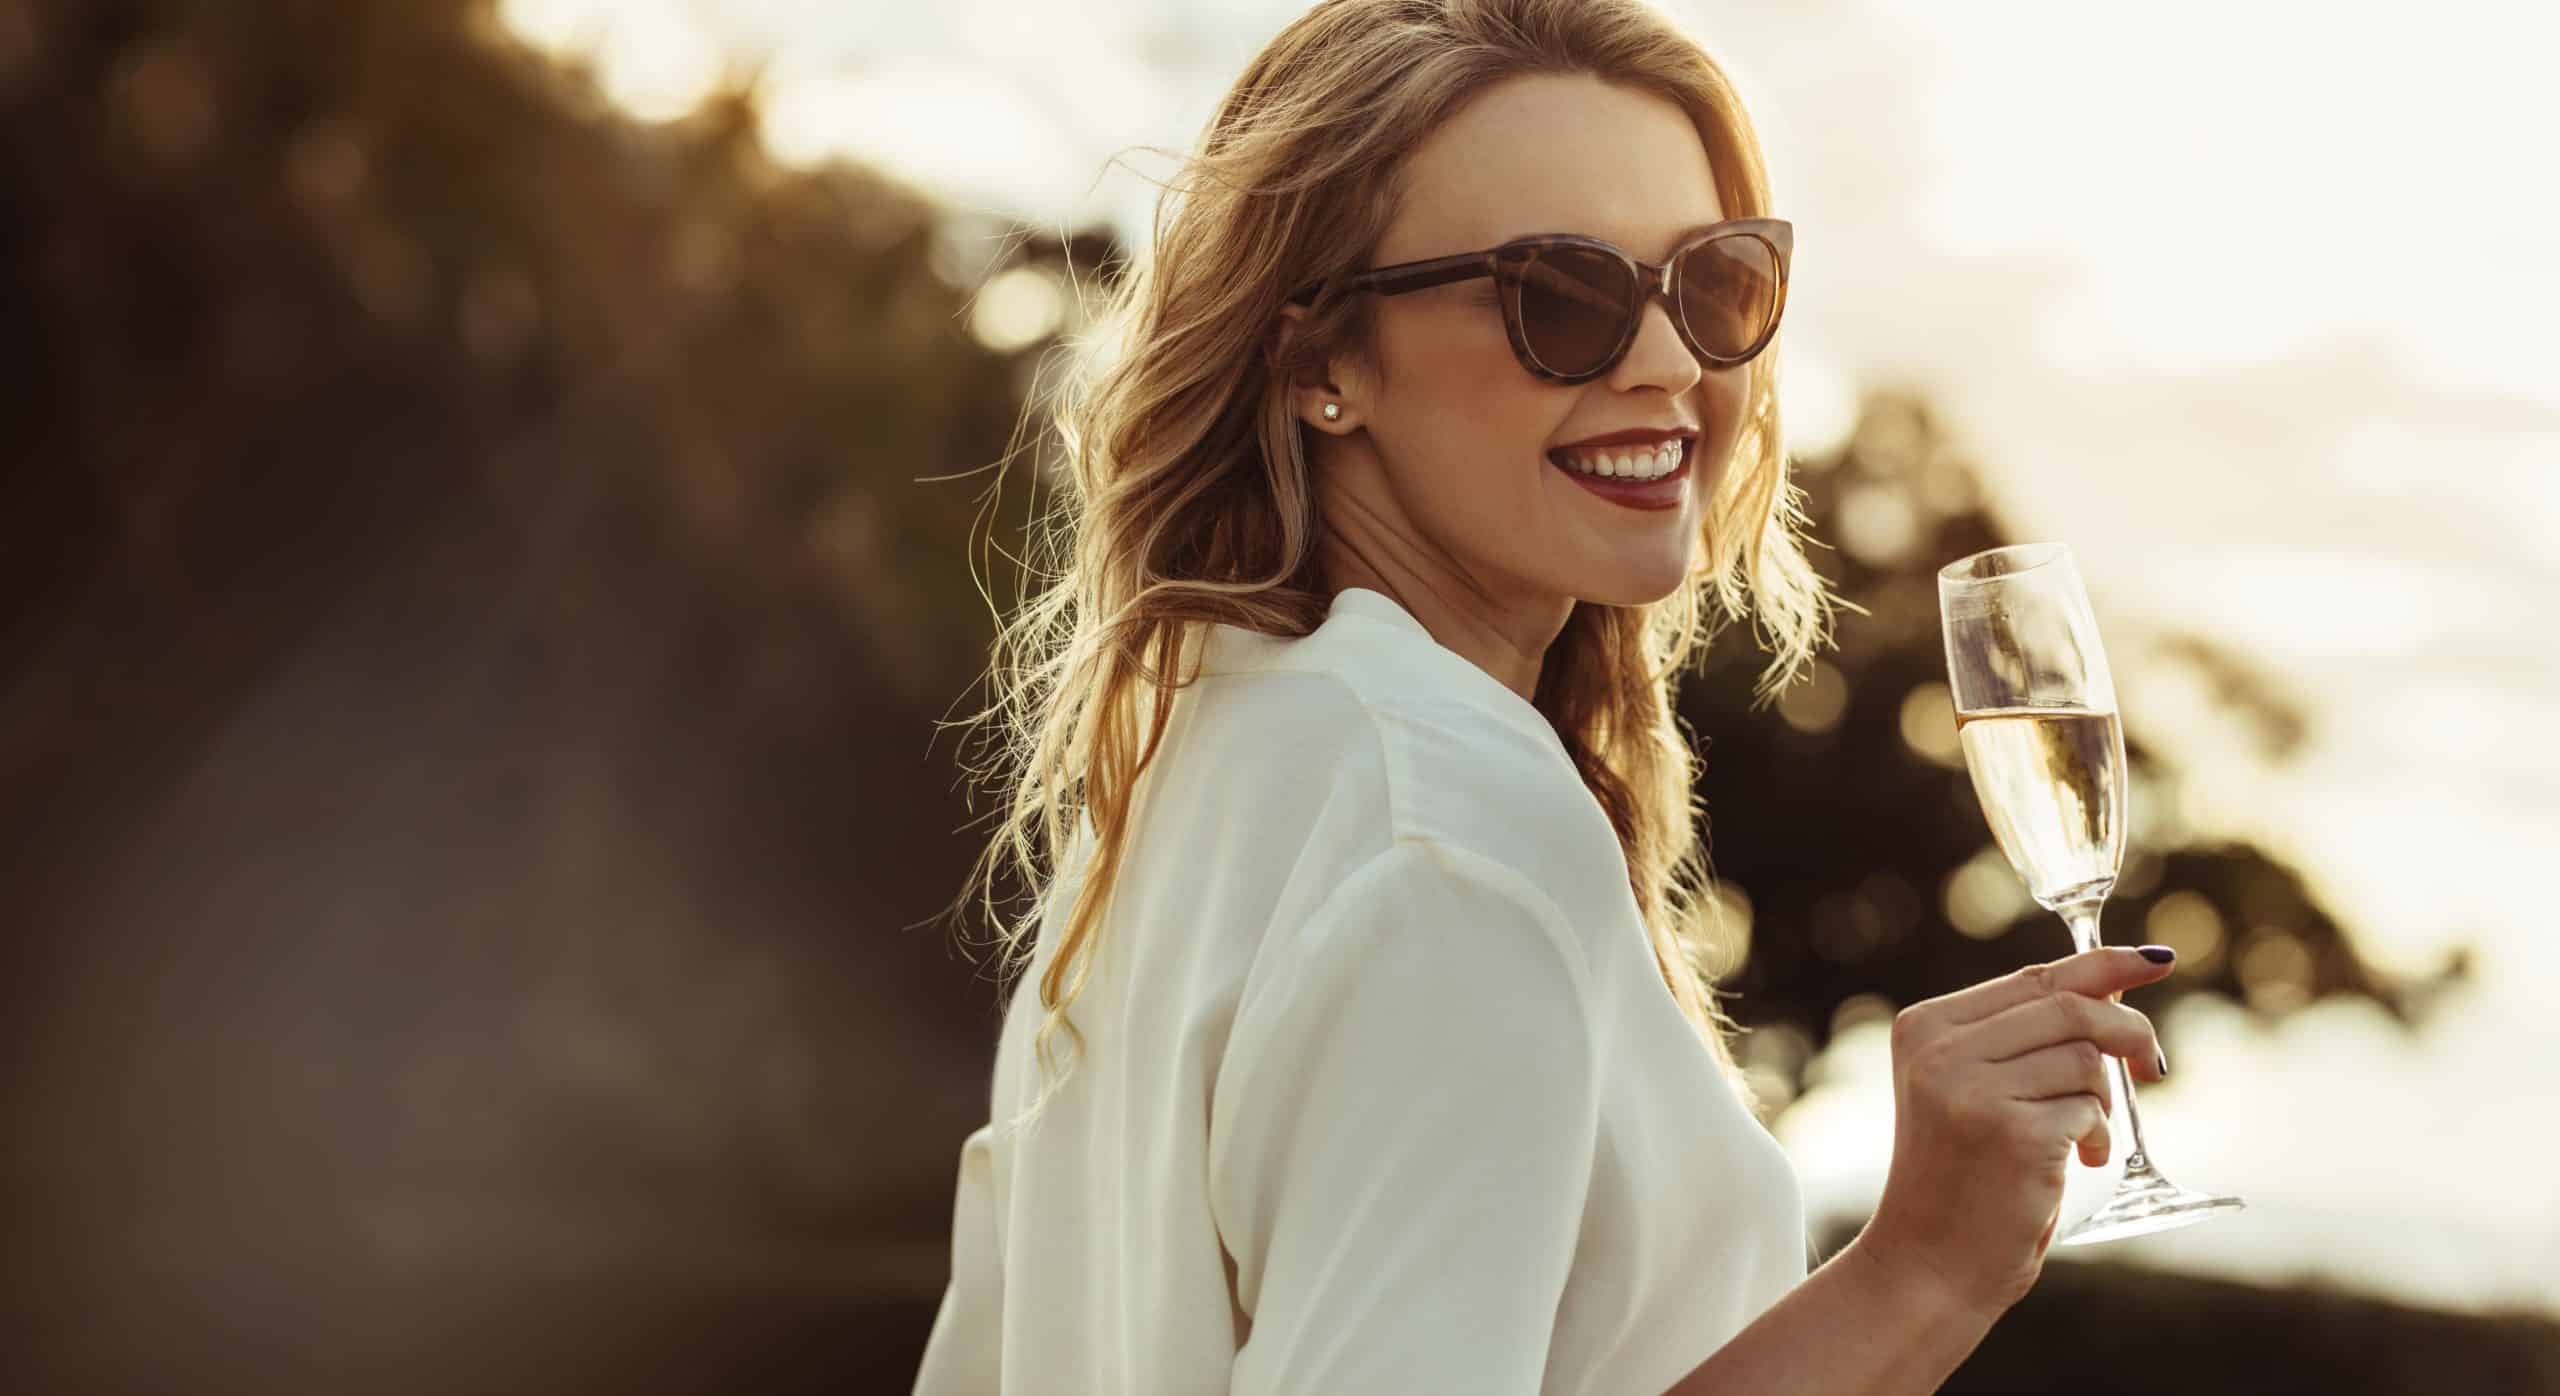 elegant-woman-in-sunglasses-with-a-glass-of-wine-outdoors-smiling-caucasian-female-having-wine-min